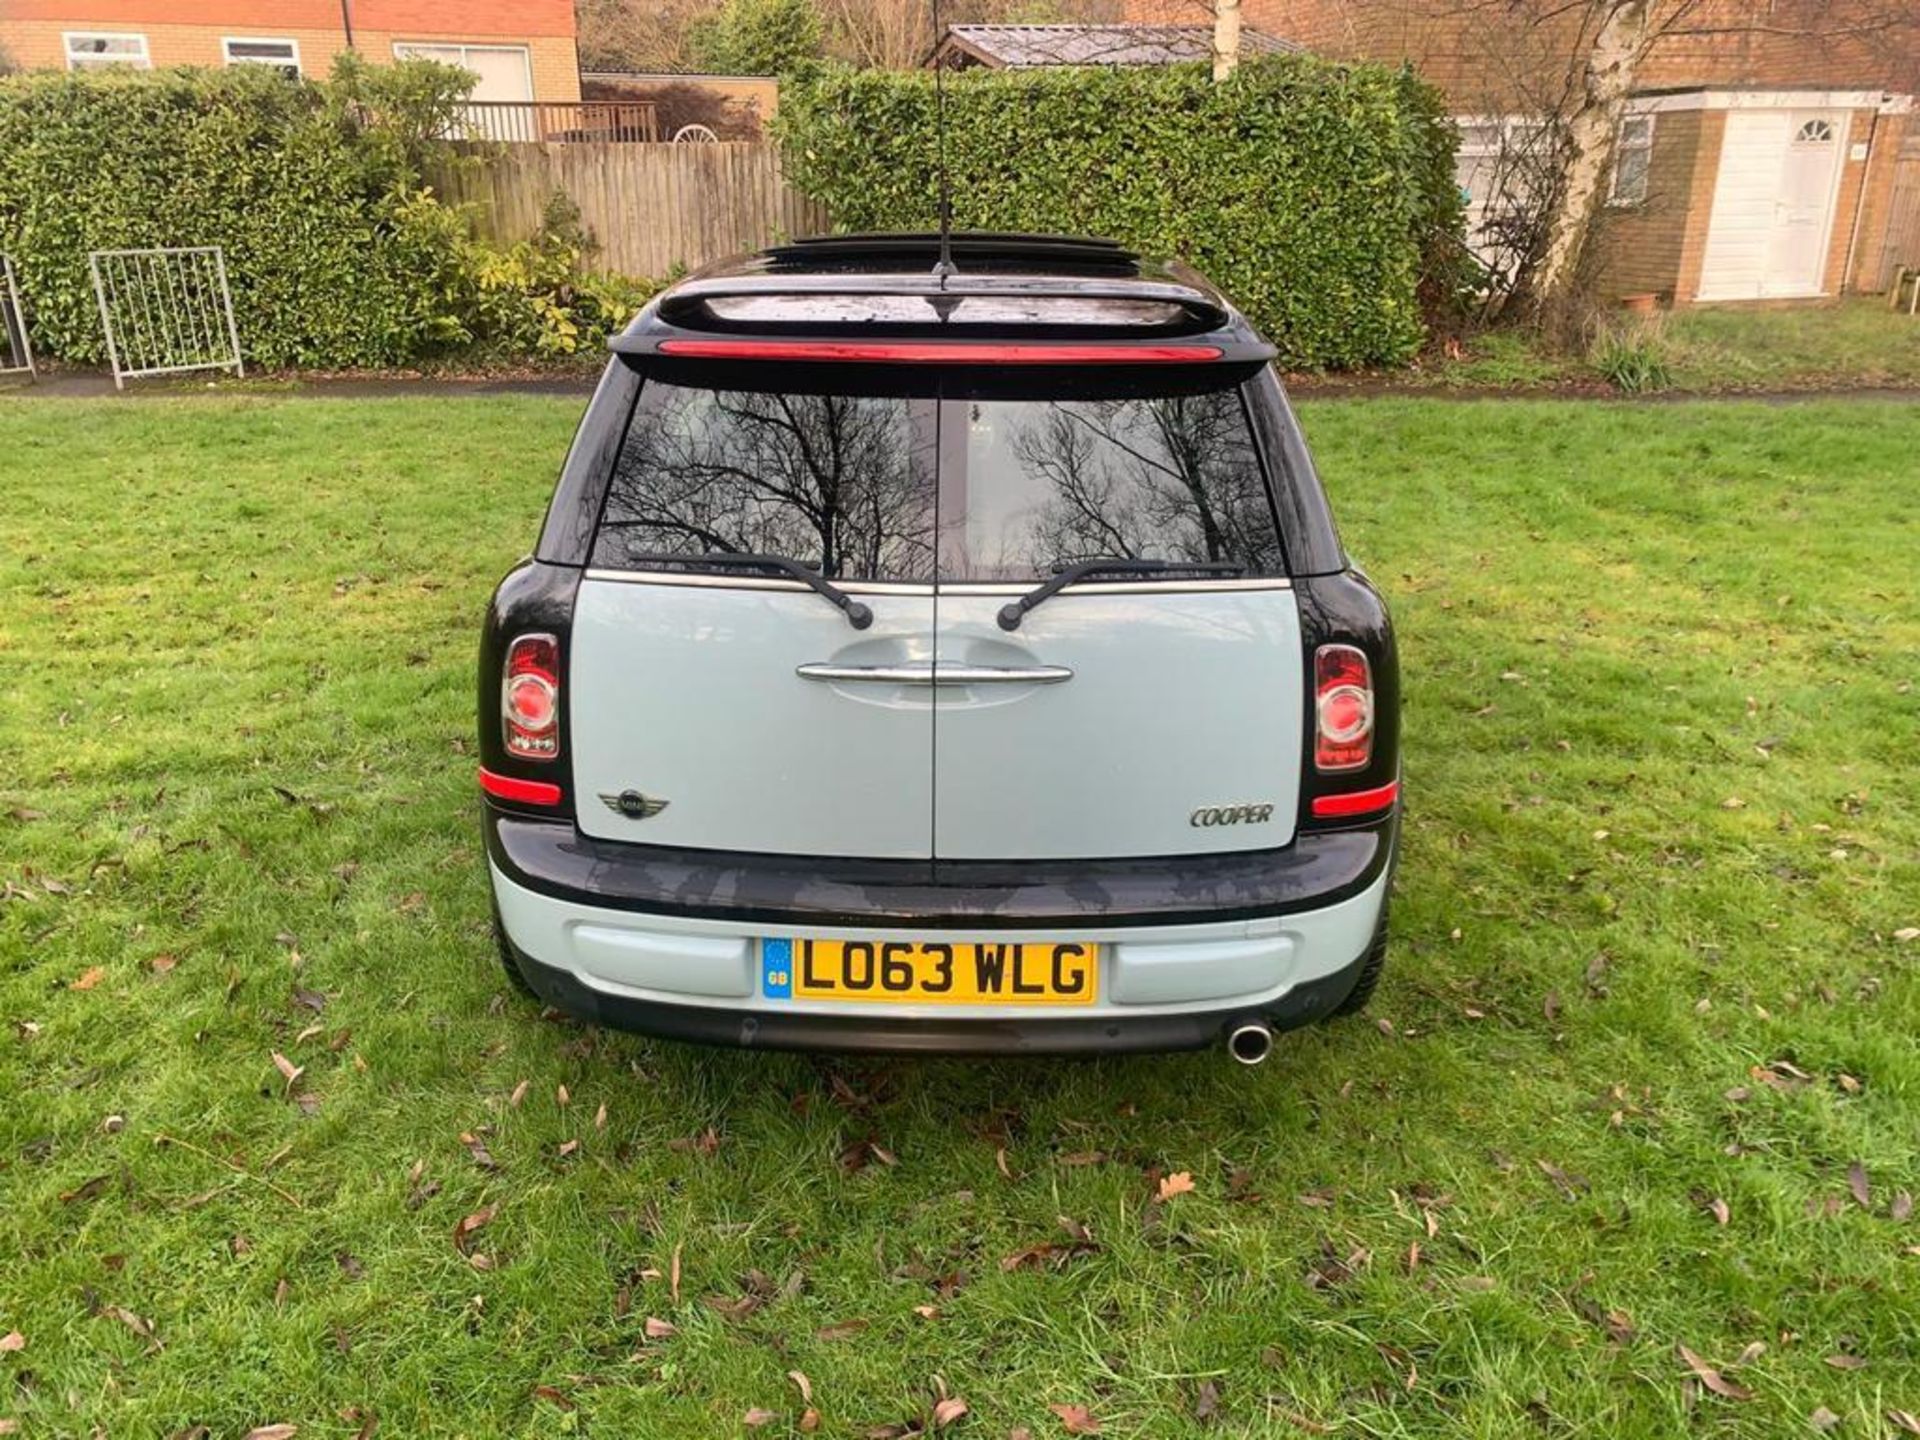 2014/63 REG MINI COOPER CLUBMAN 1.6 PETROL BLUE, SHOWING 2 FORMER KEEPERS *NO VAT* - Image 4 of 6